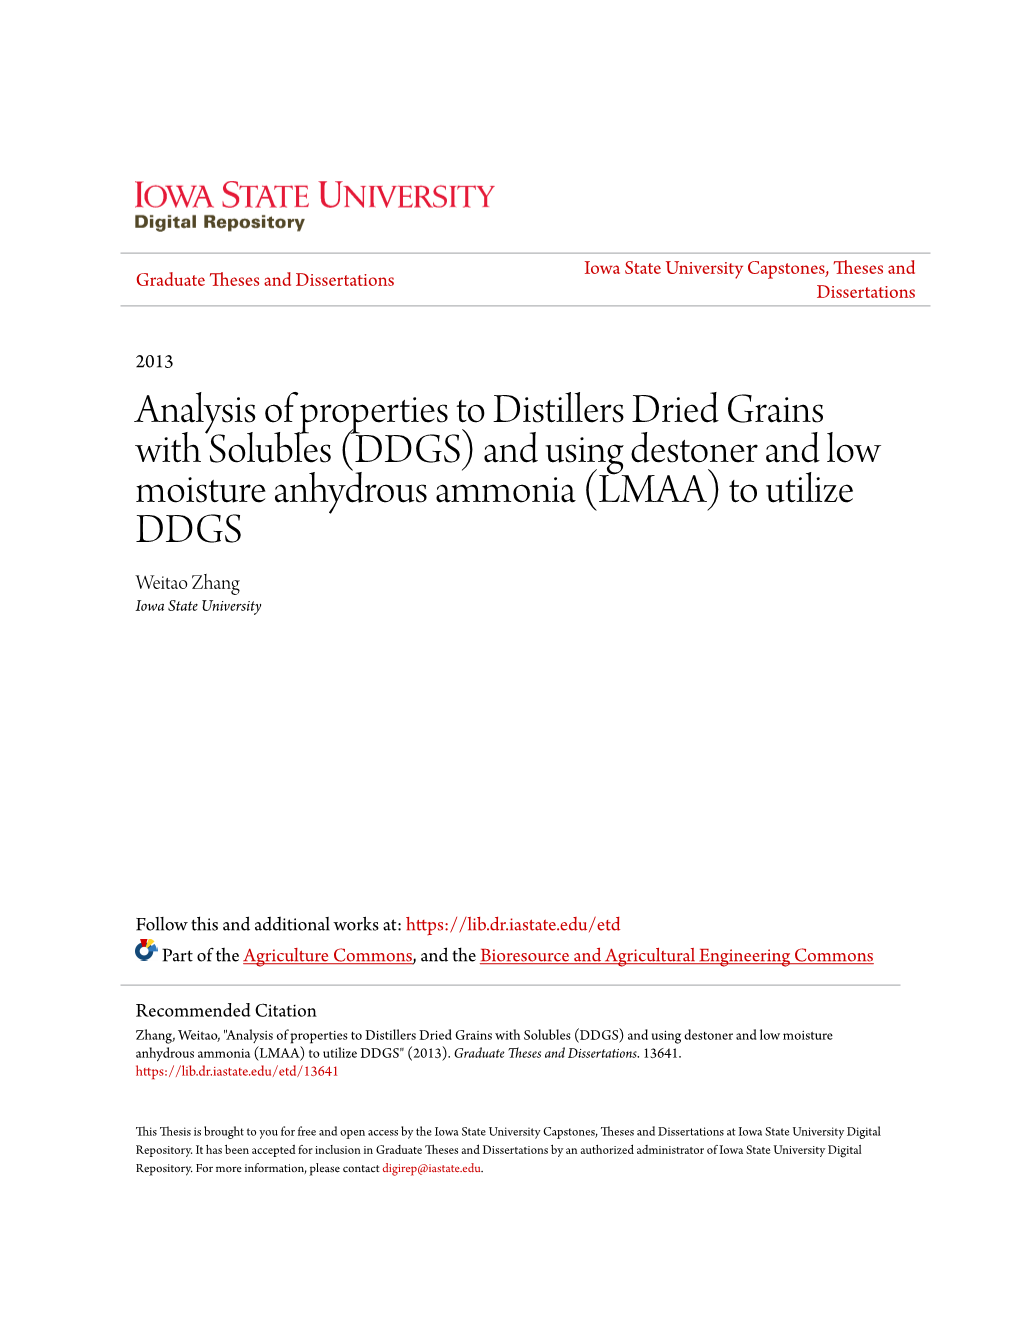 DDGS) and Using Destoner and Low Moisture Anhydrous Ammonia (LMAA) to Utilize DDGS Weitao Zhang Iowa State University